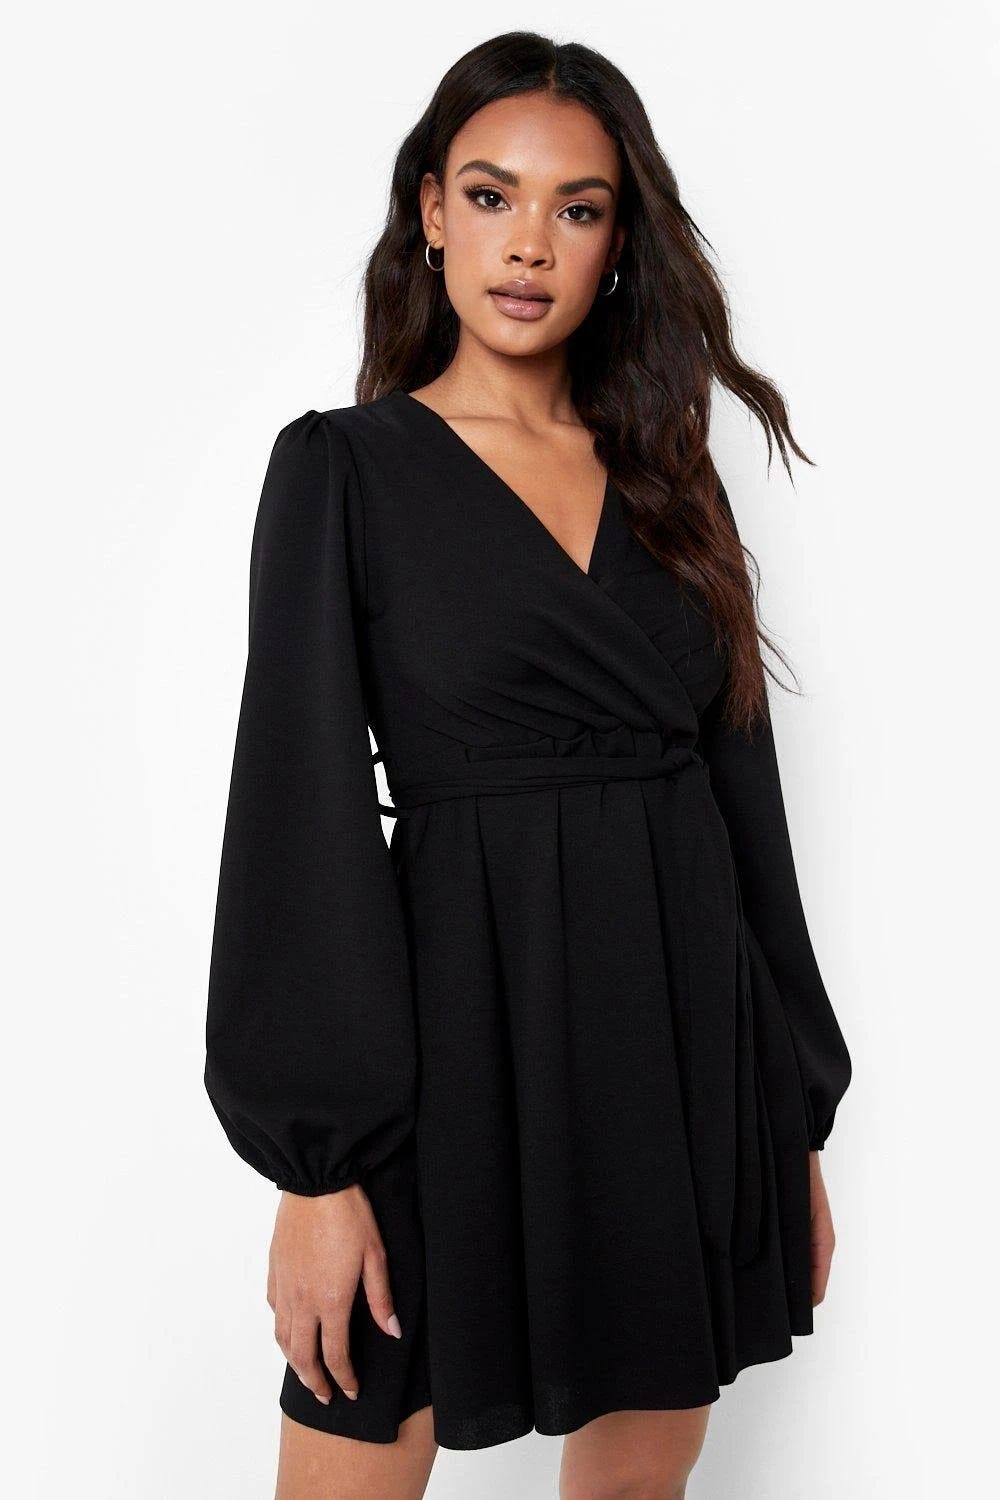 Boohoo Balloon Sleeve Wrap Mini Skater Dress - Stylish Cover-up for any Occasion | Image